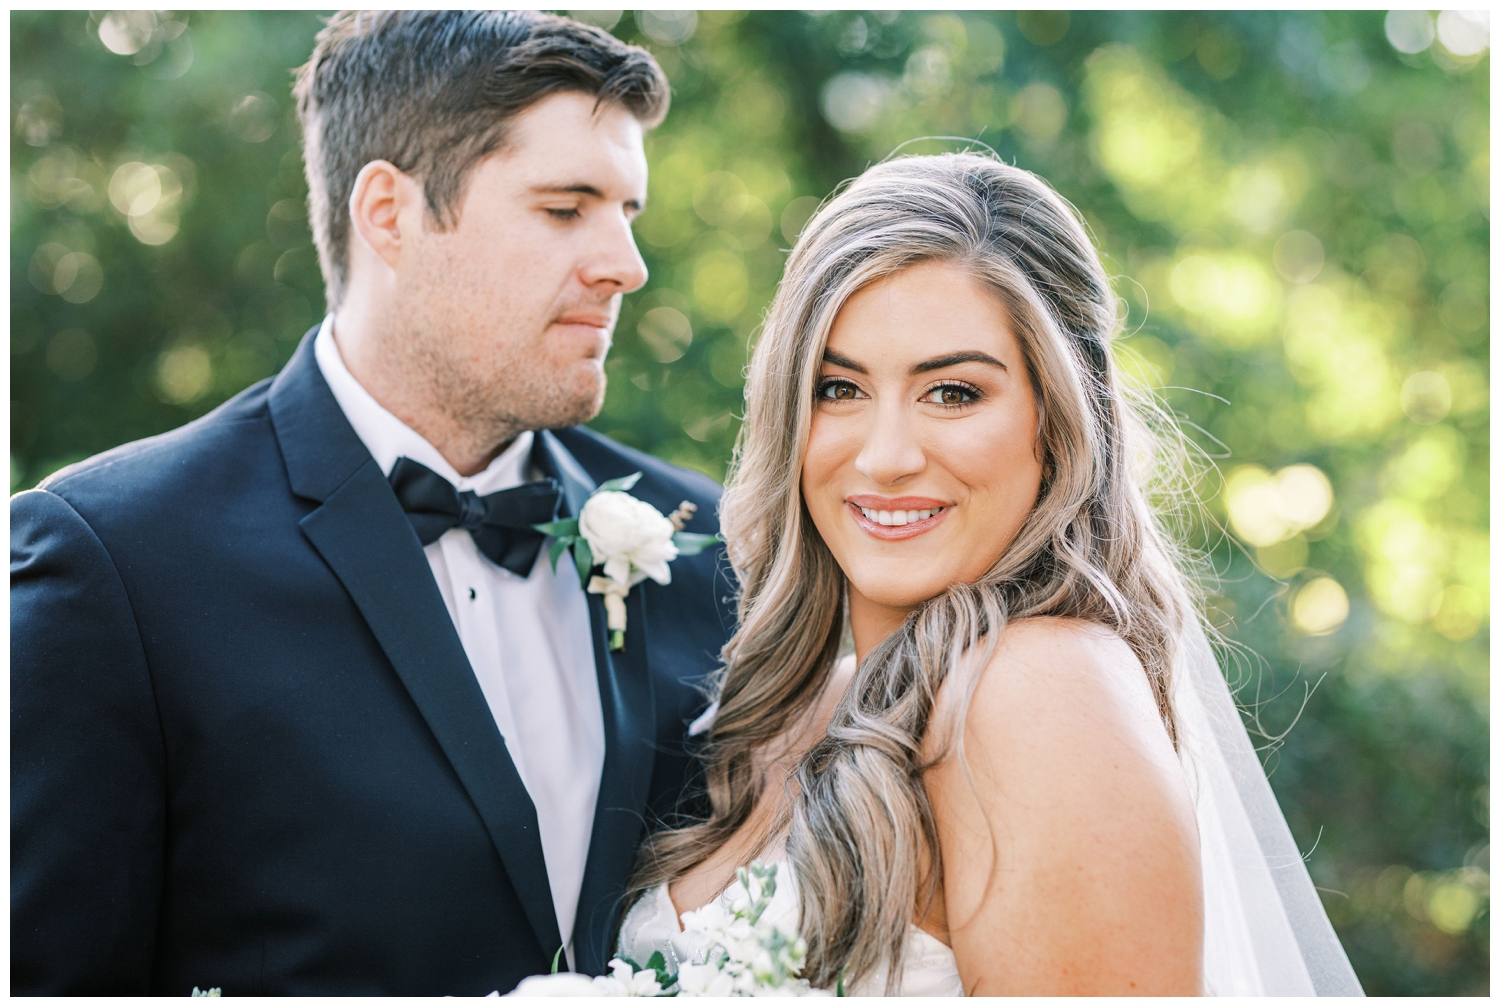 outside bride and groom portraits at at The Houstonian Hotel wedding